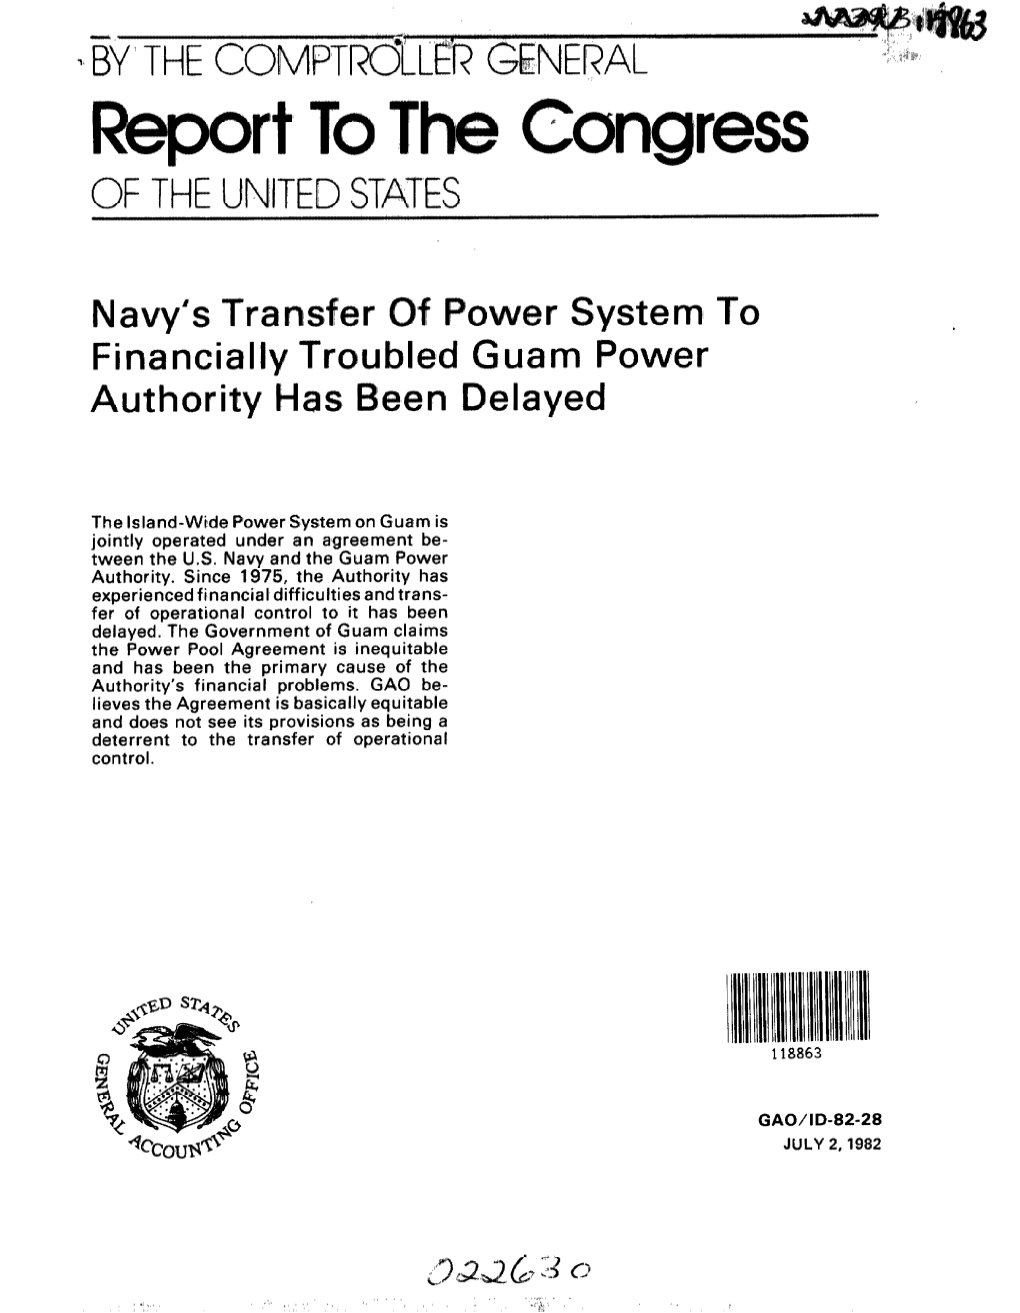 ID-82-28 Navy's Transfer of Power System to Financially Troubled Guam Power Authority Has Been Delayed